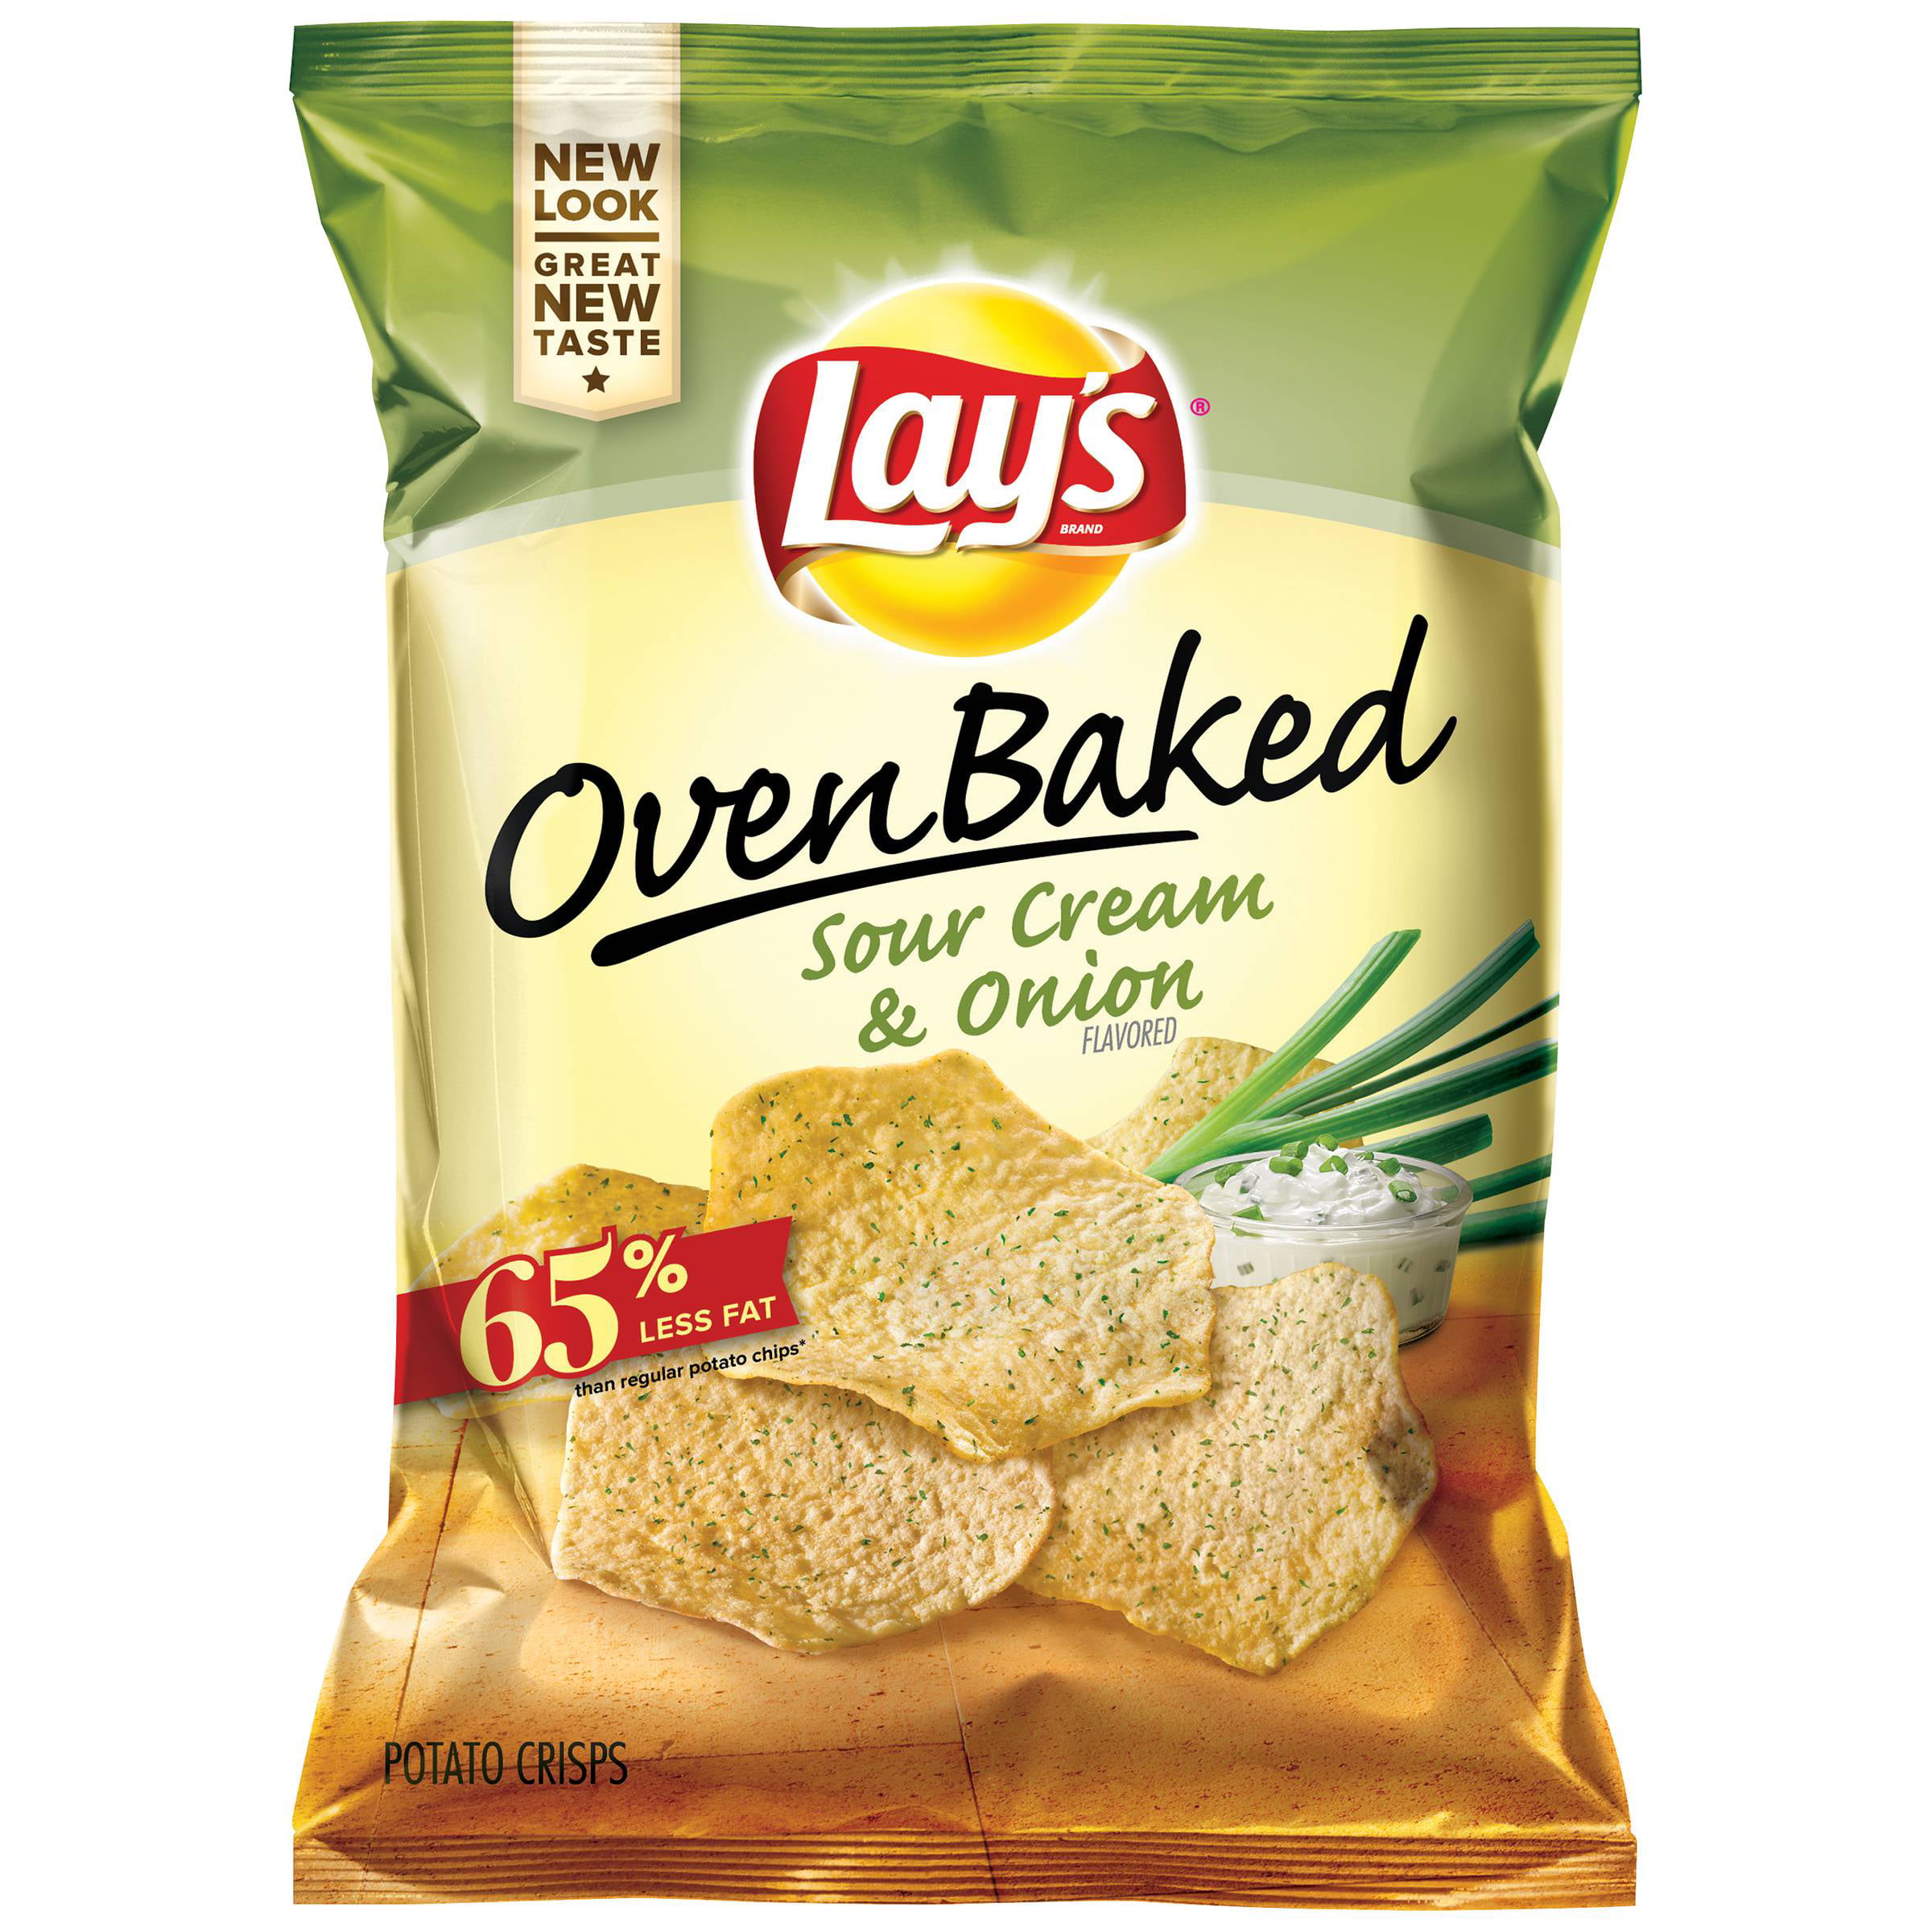 Crisps перевод на русский. Чипсы Лейс Oven Baked. Lays Chips Baked Oven. Lays Sour Cream. Lays from the Oven.